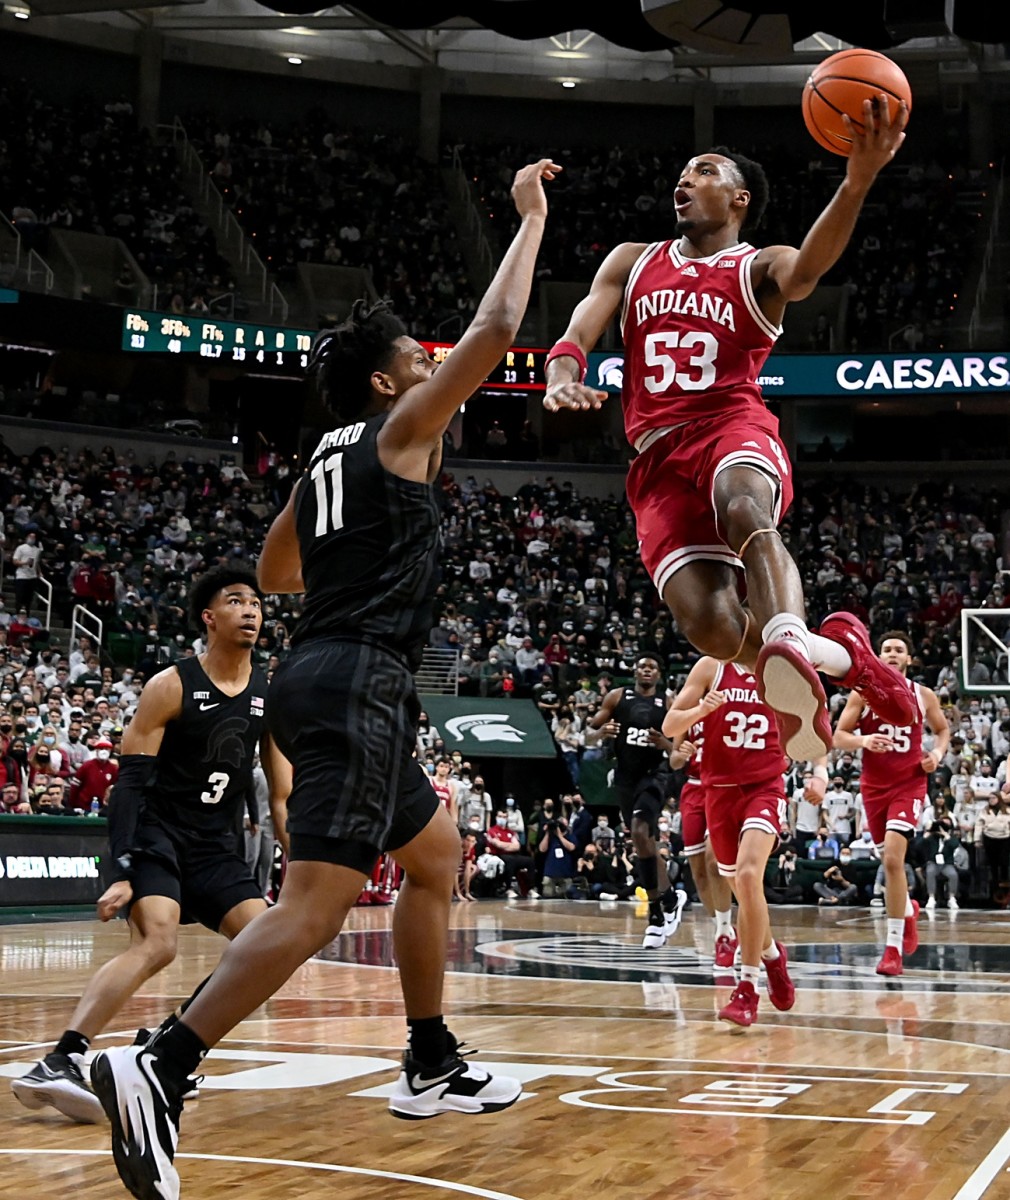 Indiana guard Tamar Bates (53) drives to the basket against Michigan State's A.J. Hoggard (11) ion Saturday at the Breslin Center in East Lansing, Mich,. (Dale Young/USA TODAY Sports)